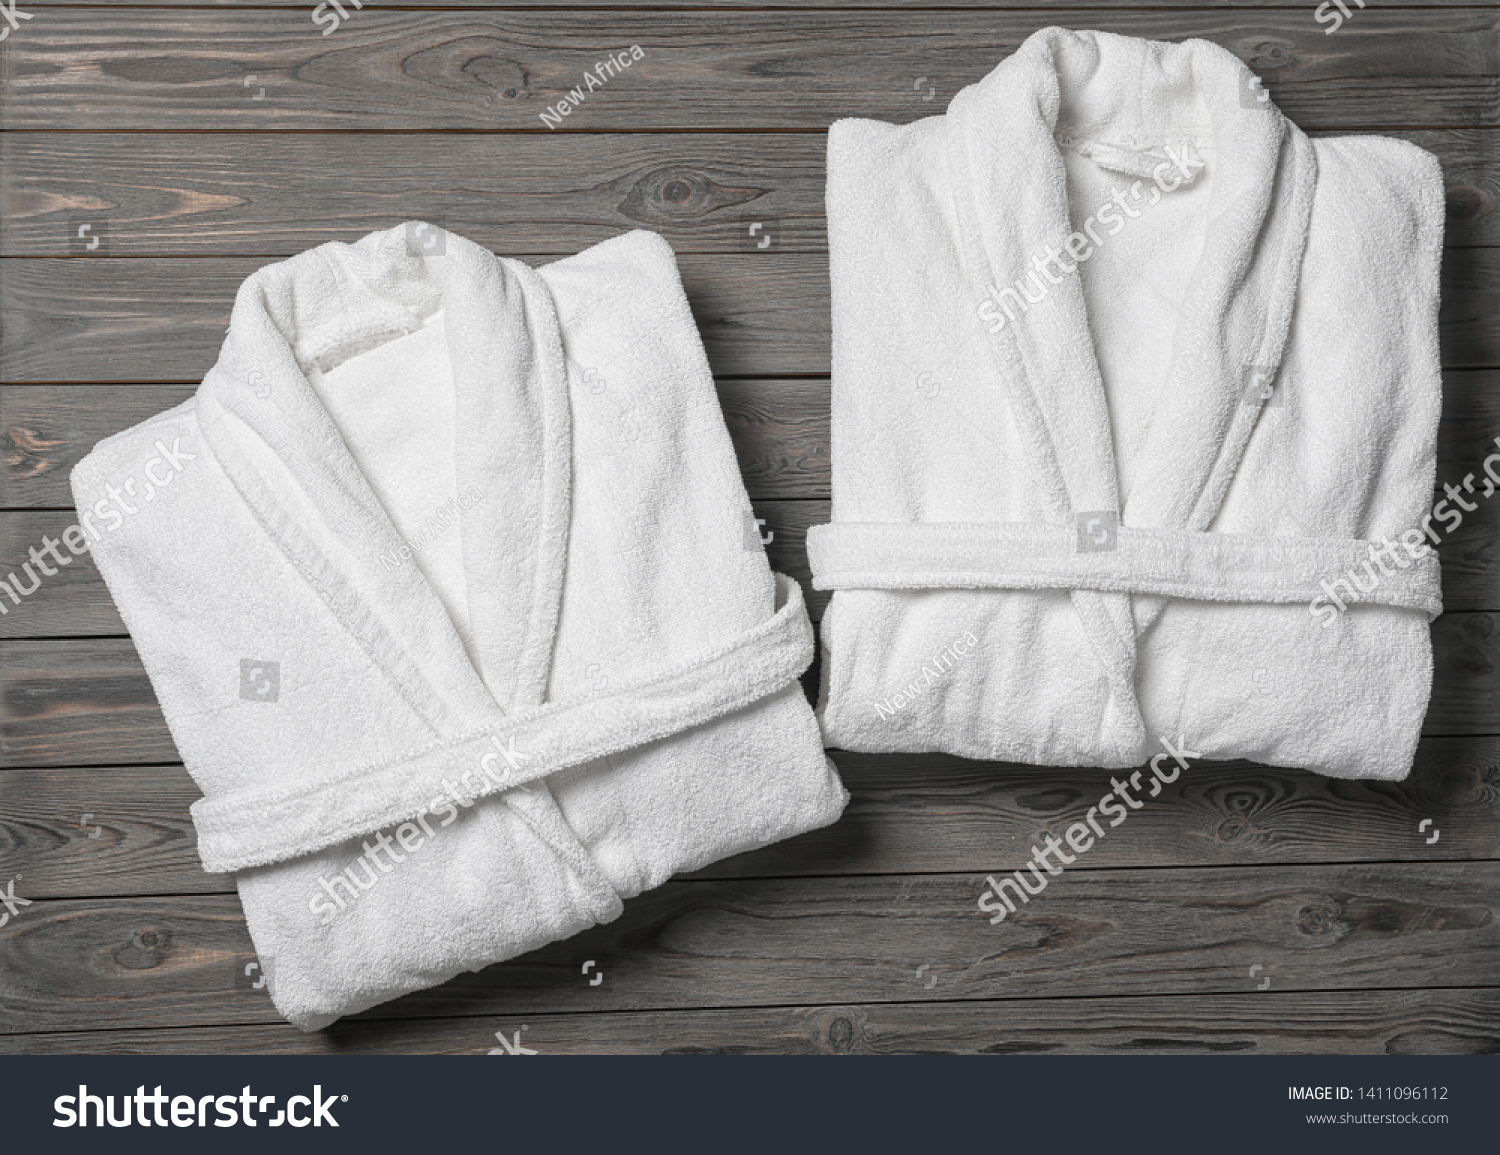 Flat lay composition with folded bathrobes on wooden background #1411096112